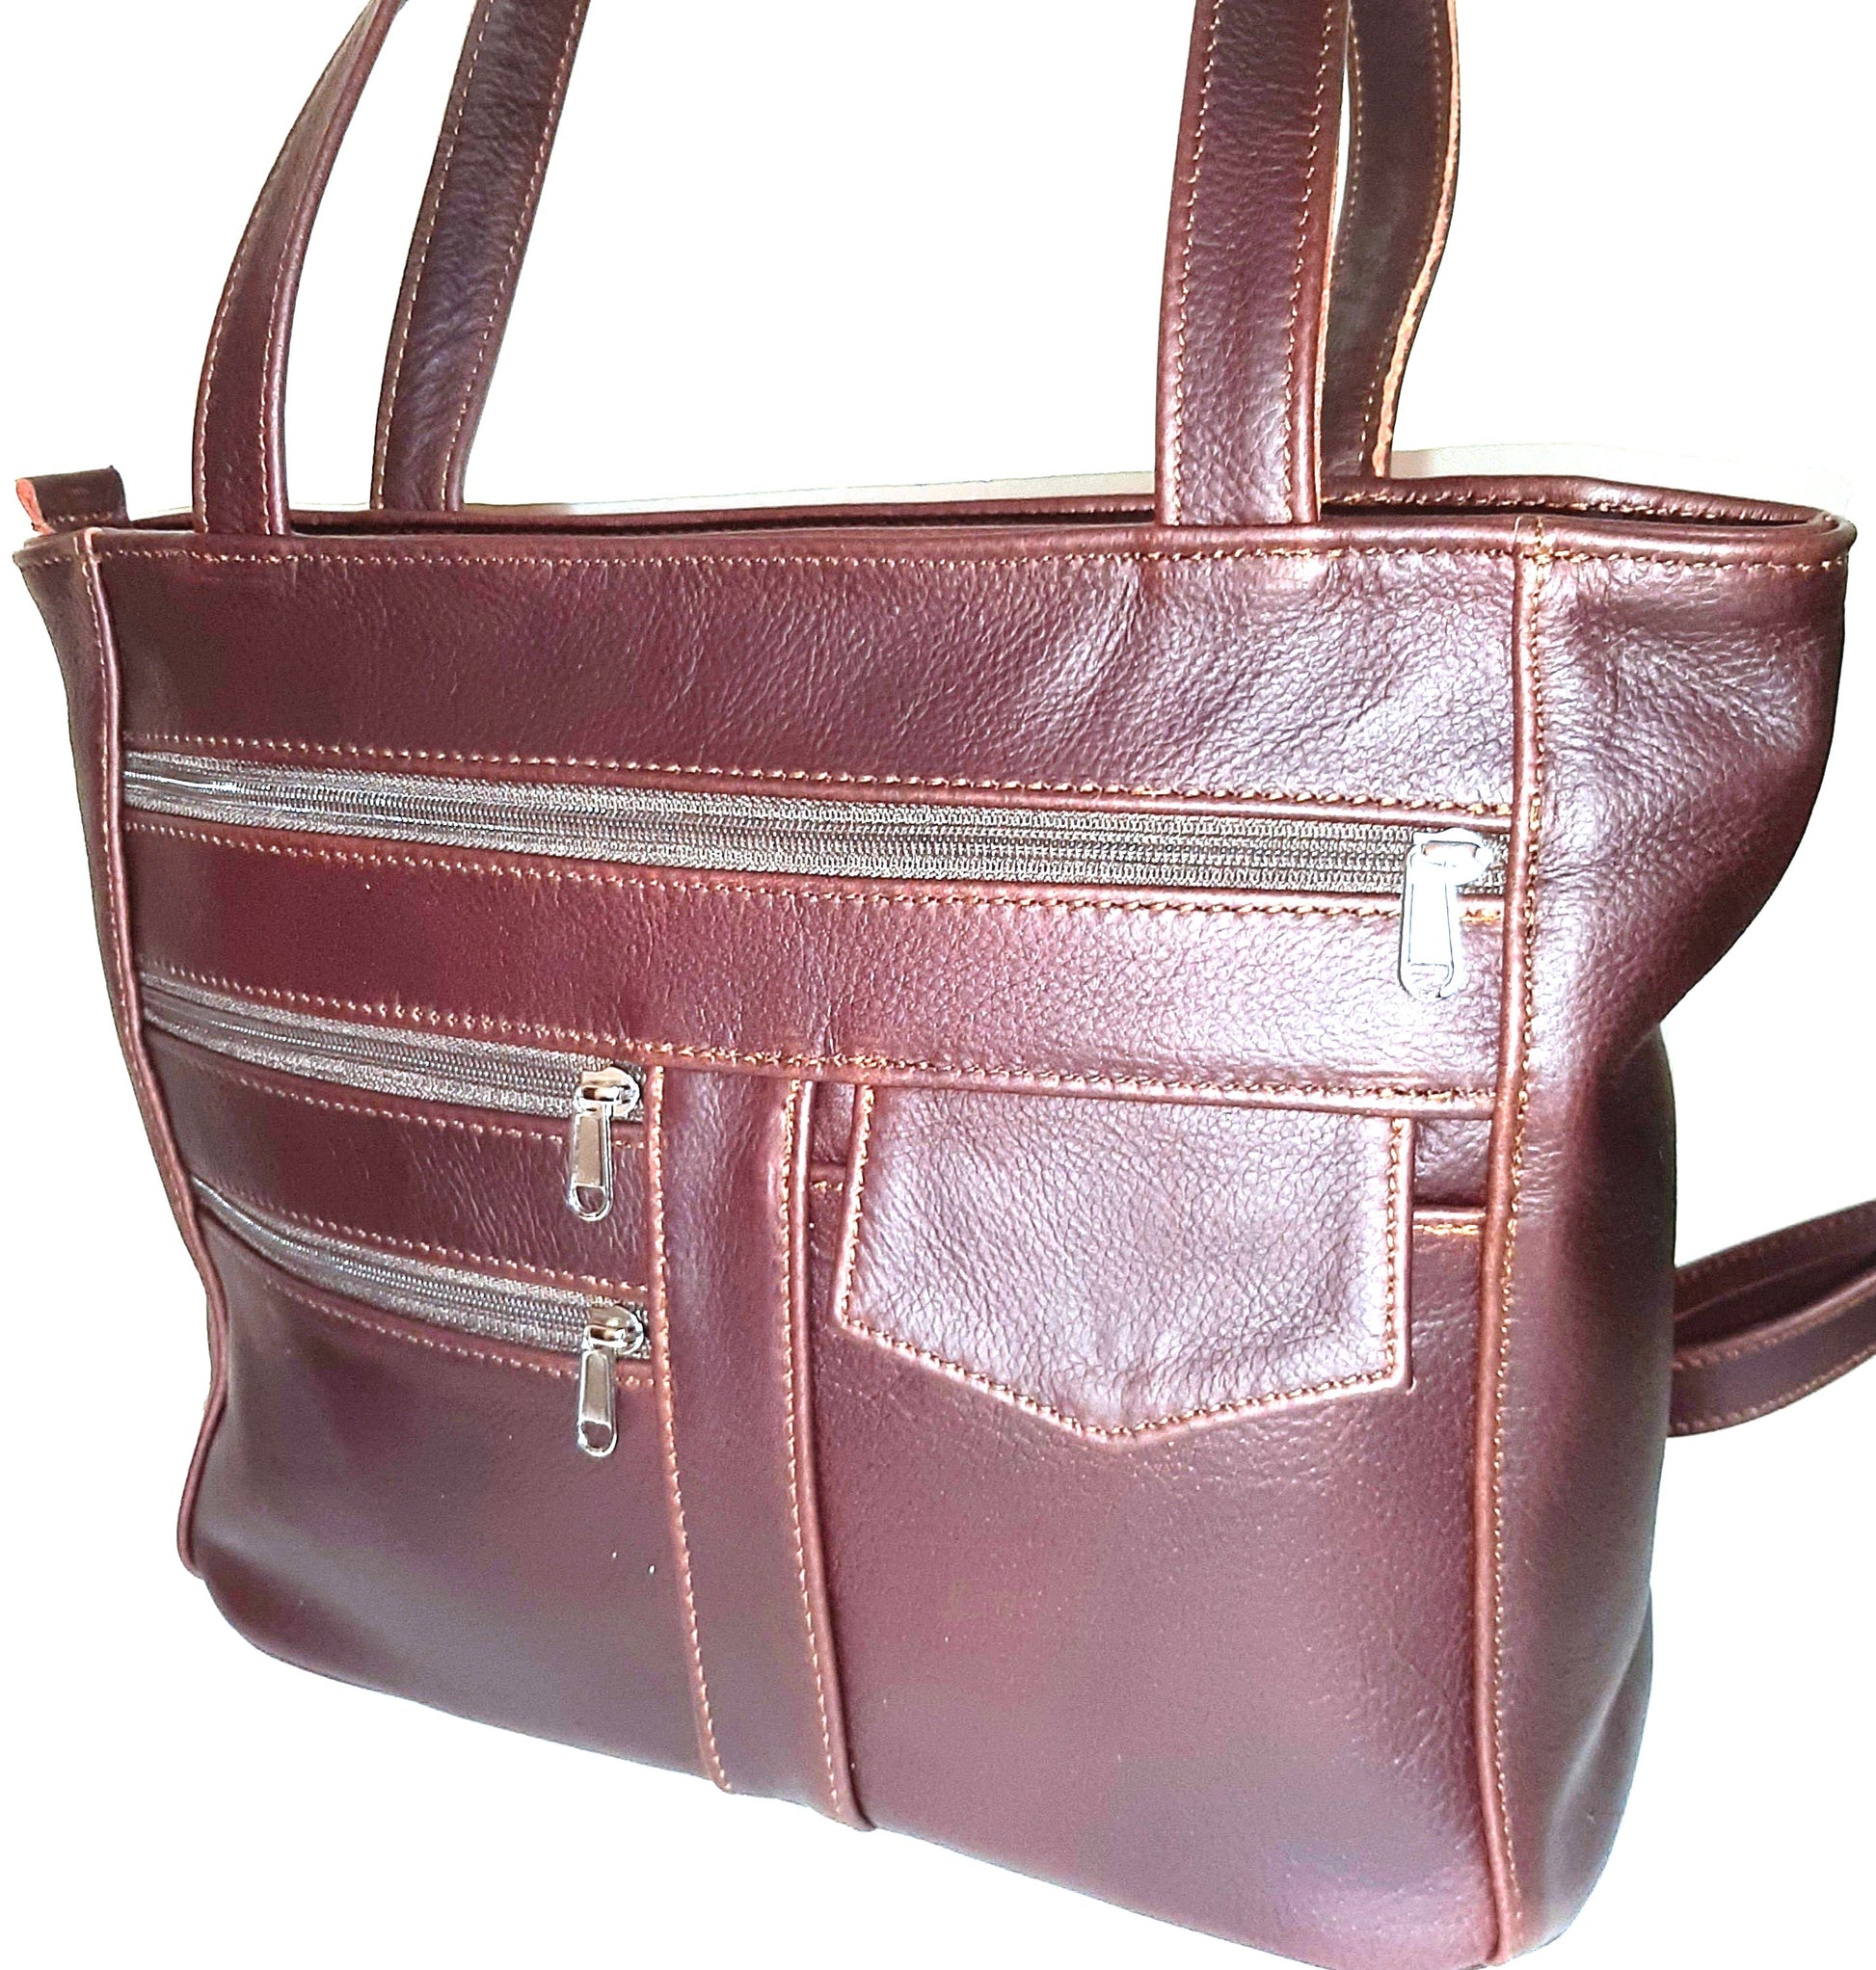 MDL leather Bags - cape Masai Leather